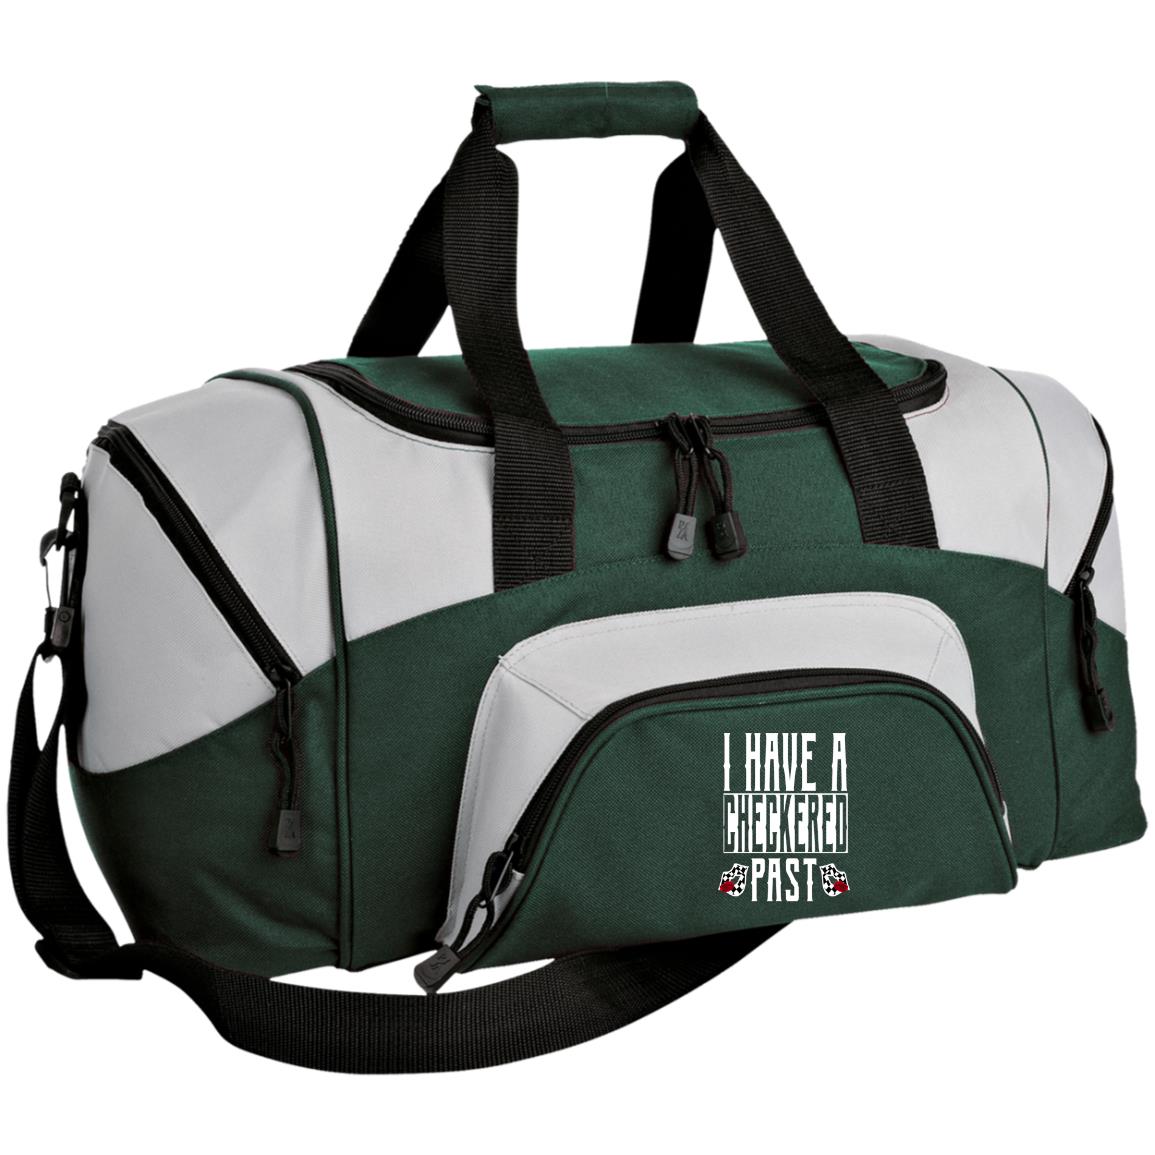 I Have A Checkered Past Small Colorblock Sport Duffel Bag